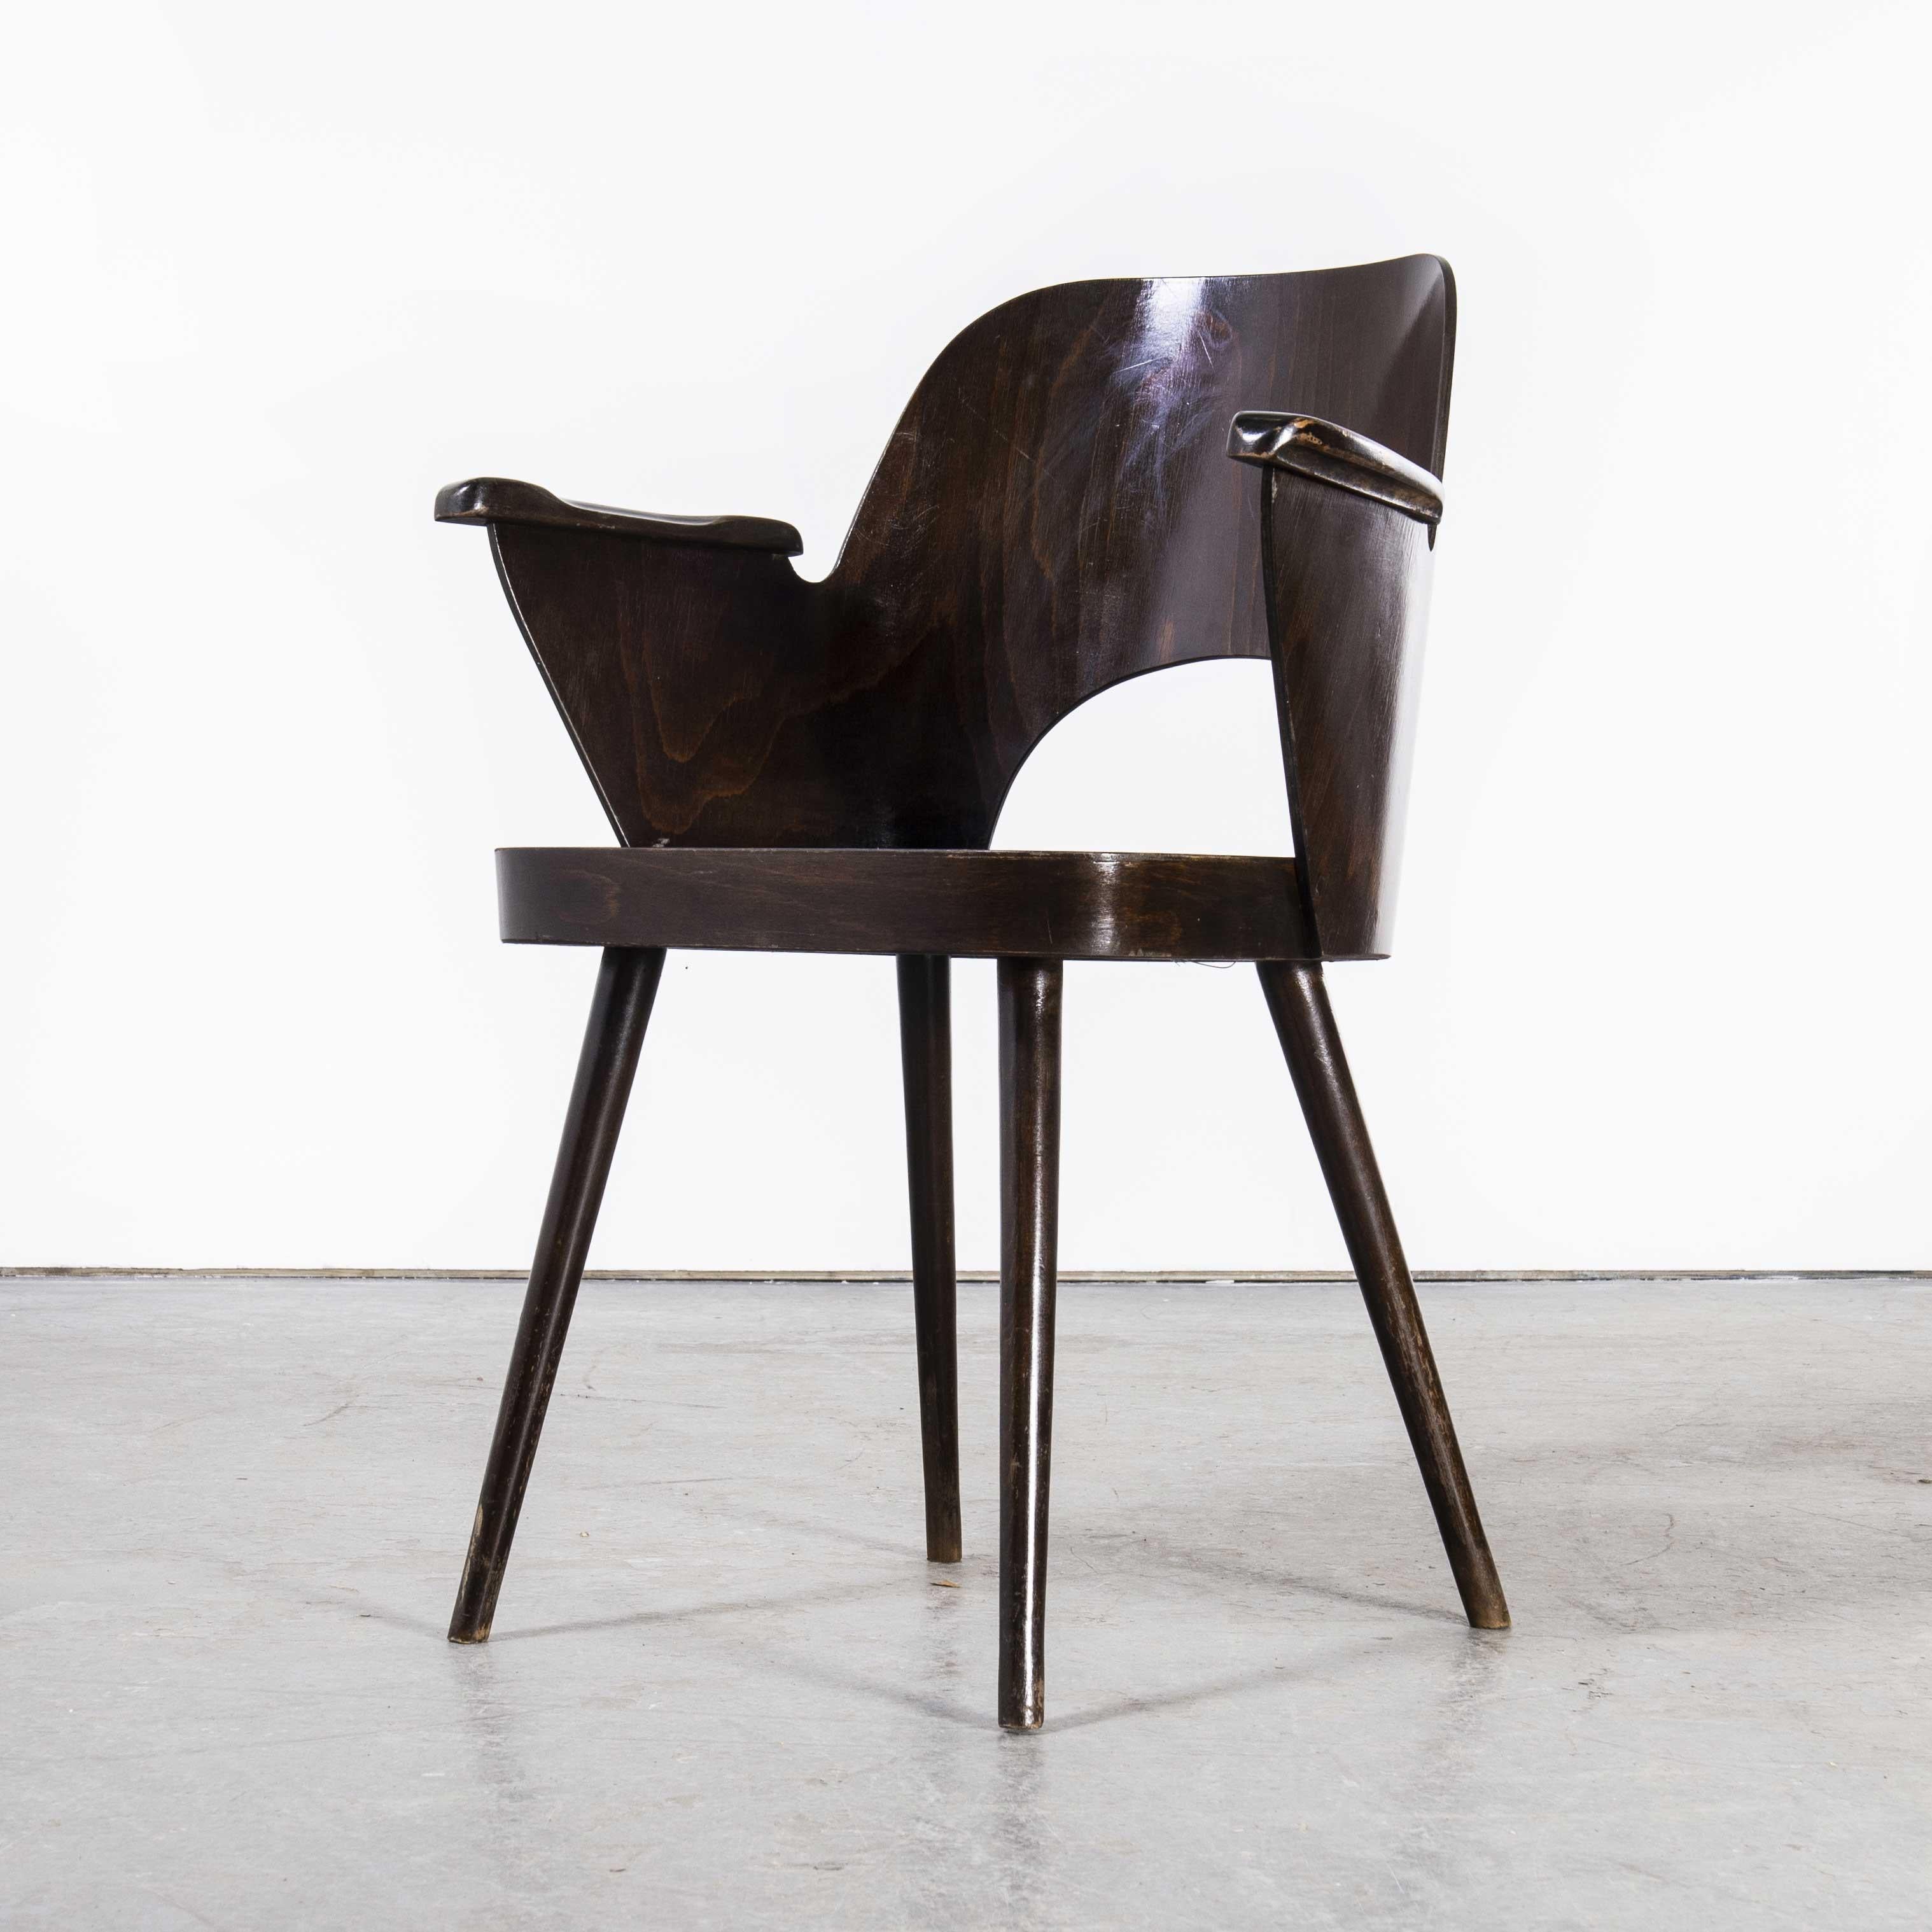 1950’s Dark walnut side chair – Oswald Haerdtl Model 515
1950’s Dark walnut side chair – Oswald Haerdtl Model 515. This chair was produced by the famous Czech firm Ton, still trading today and producing beautiful furniture, they are an offshoot of